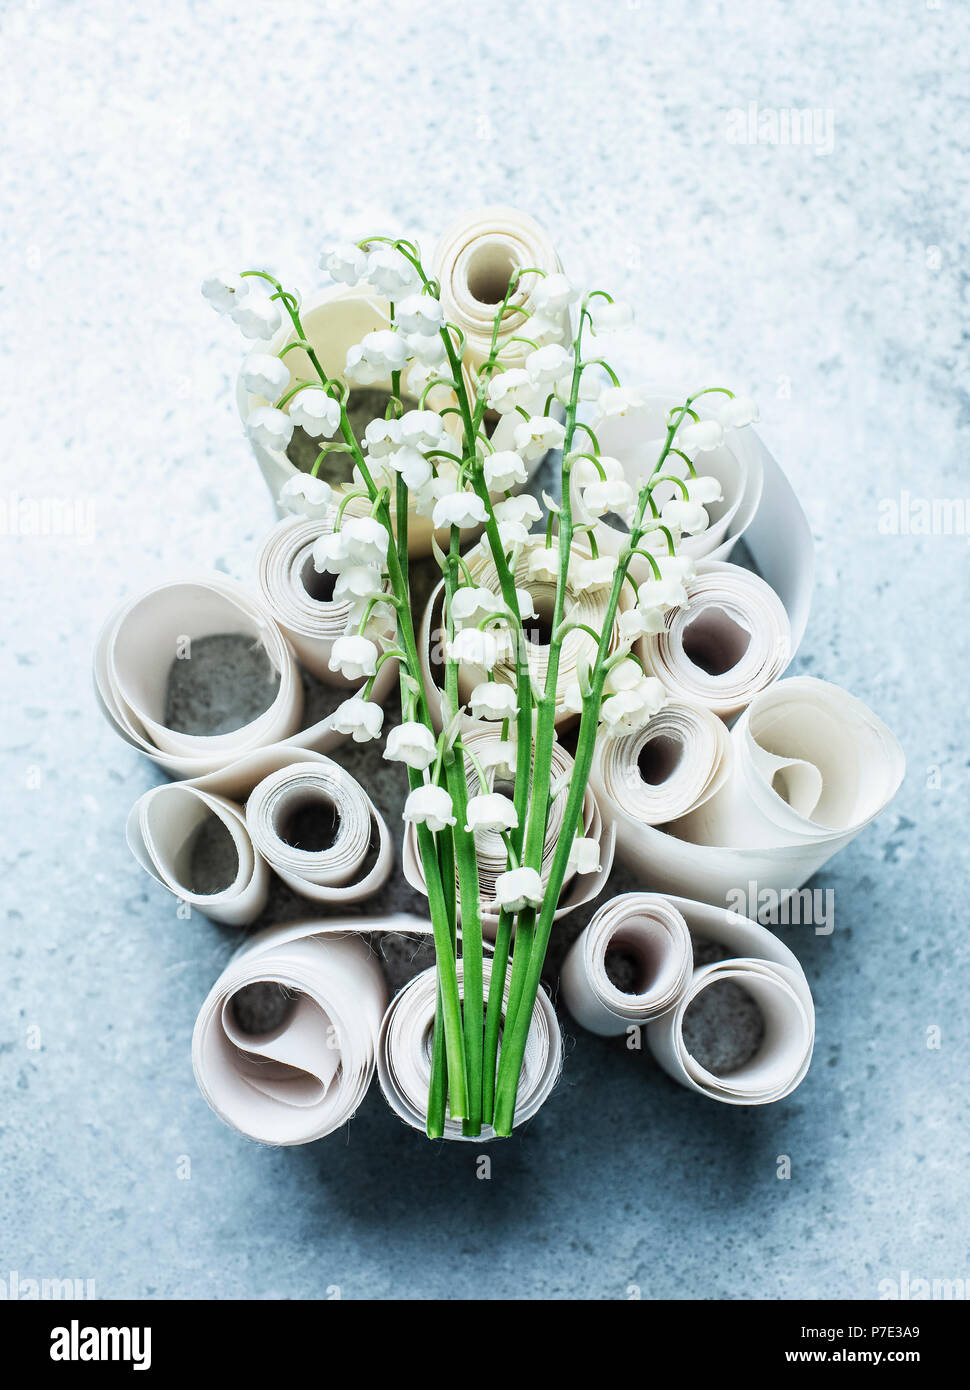 Lily of the valley cut flowers on curled ribbons, overhead view Stock Photo